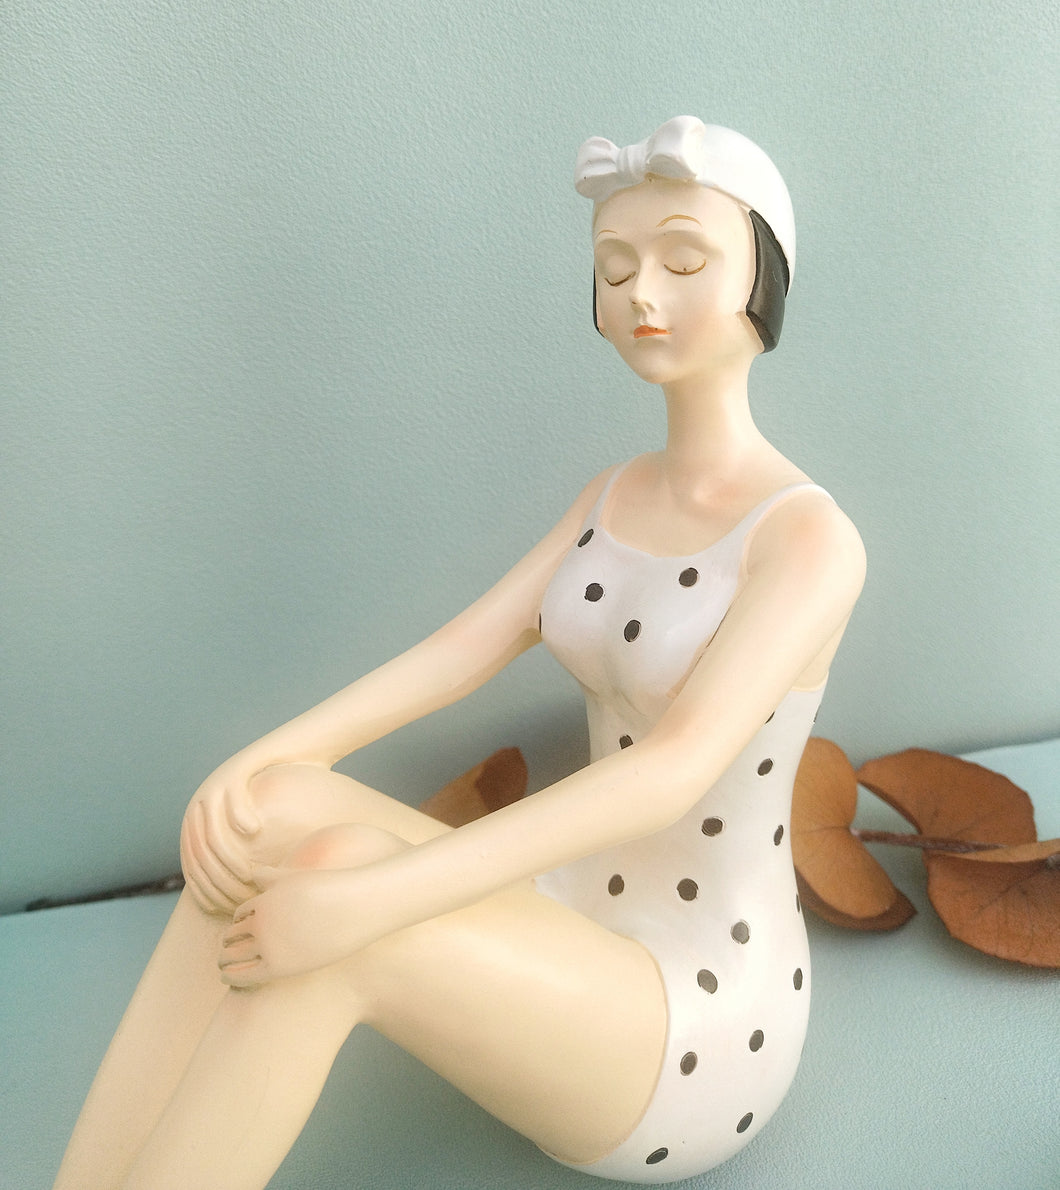 Vintage Style Swimming Girl, 50s Woman Figurine With Black And White Swimsuit